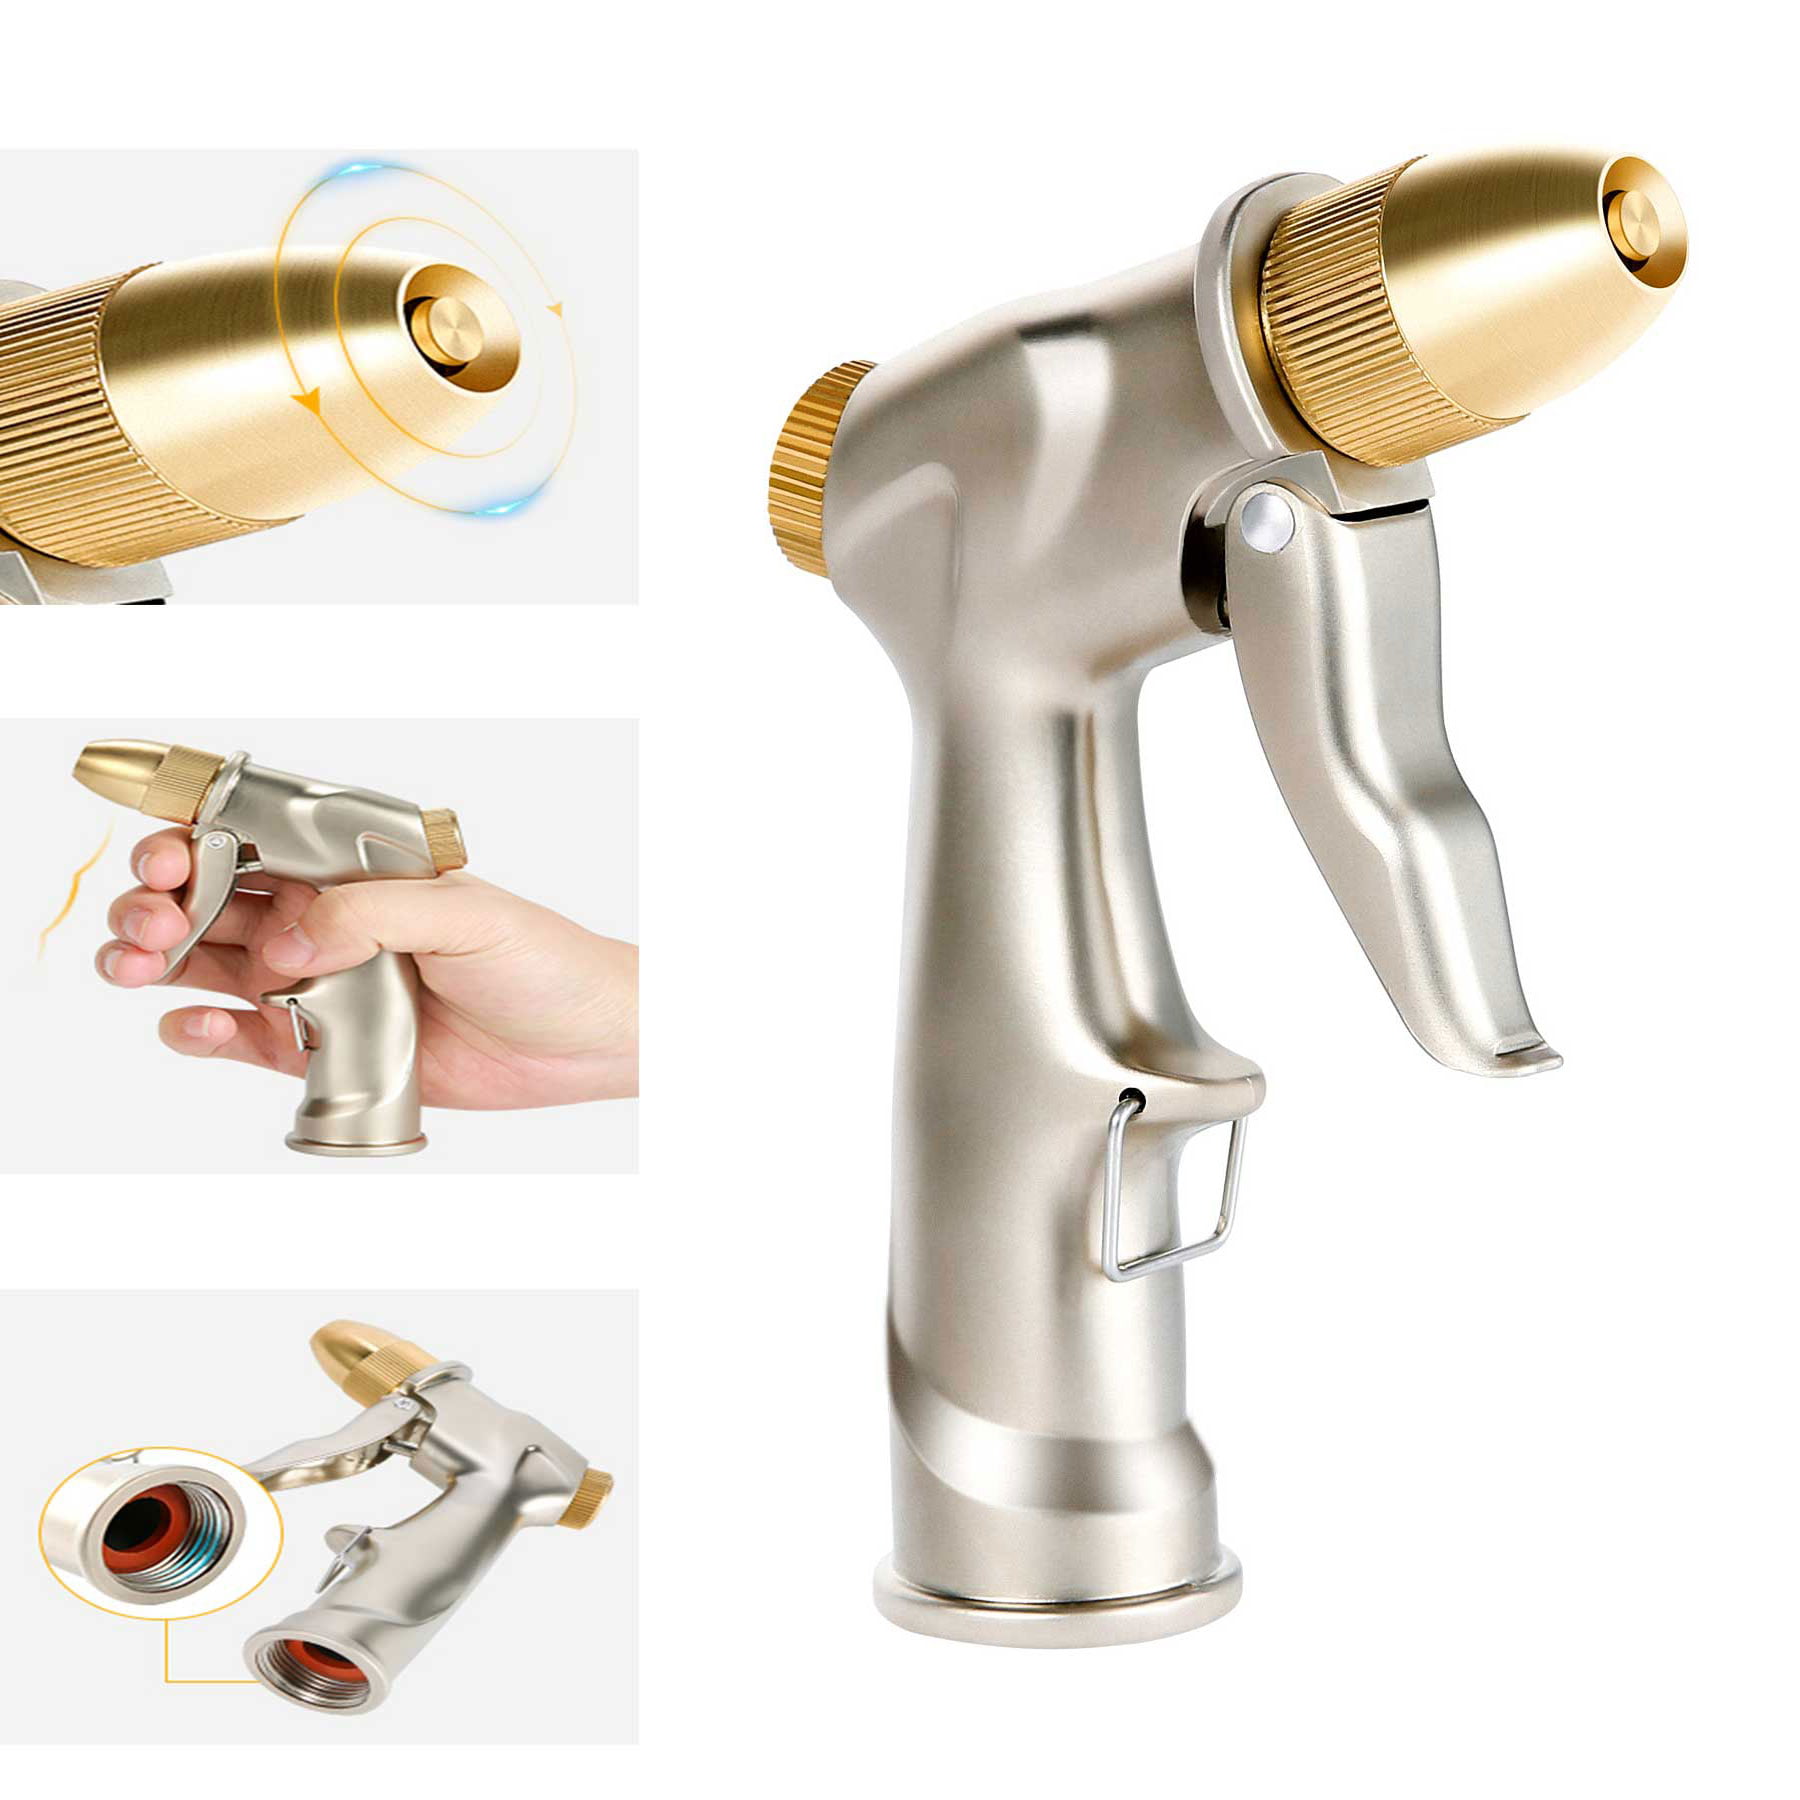 Fanhao Garden Hose Nozzle Review  Choosing the Perfect Nozzle for Your Garden